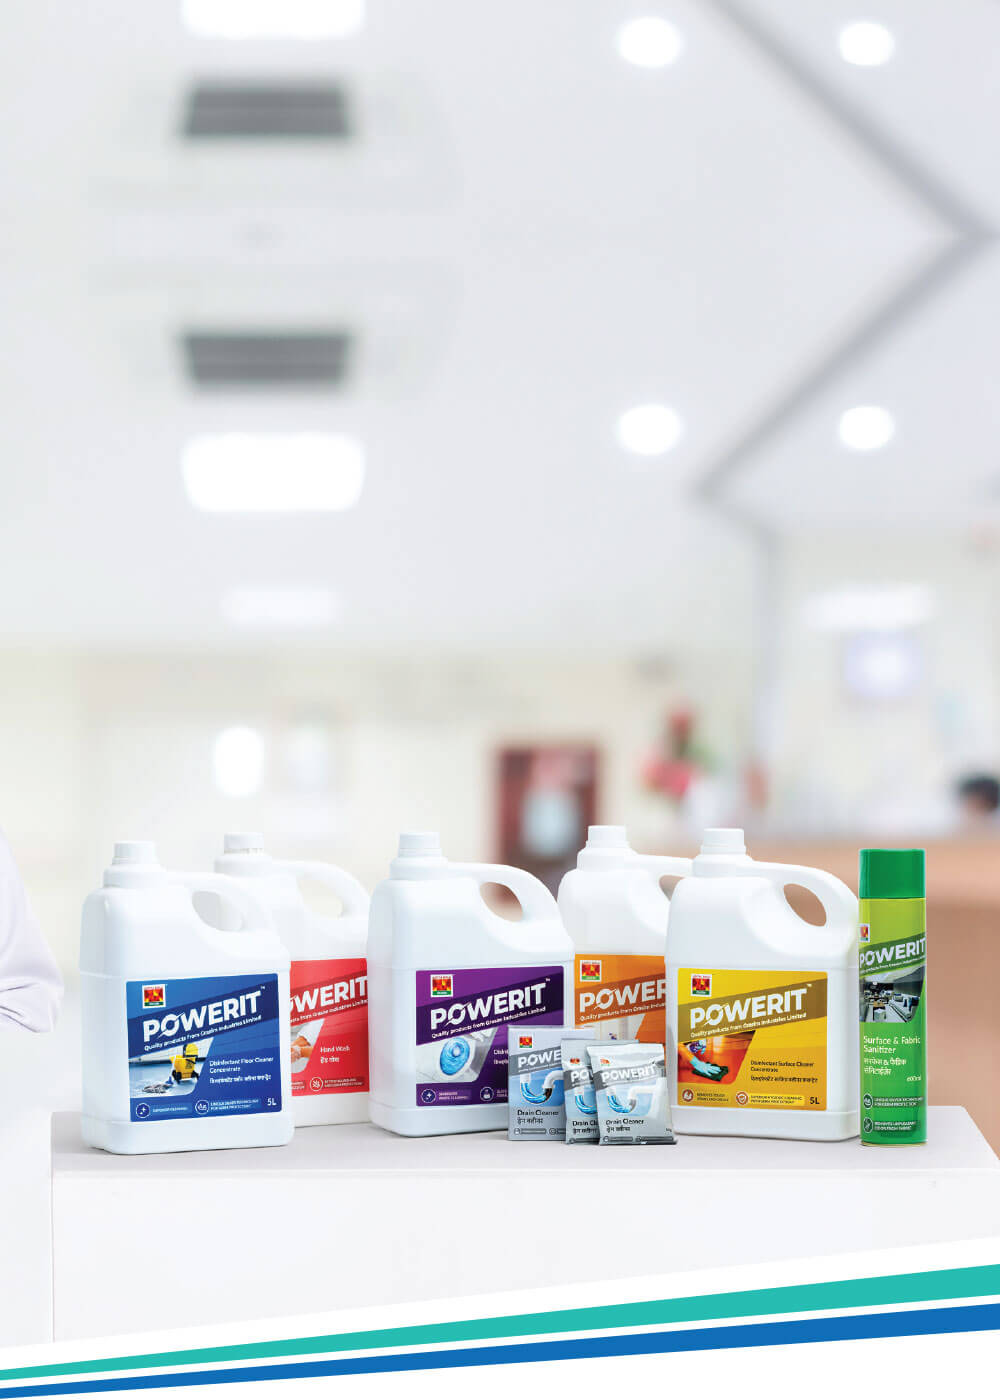 Powerit Cleaning Range endorsed by Experts - for mobile